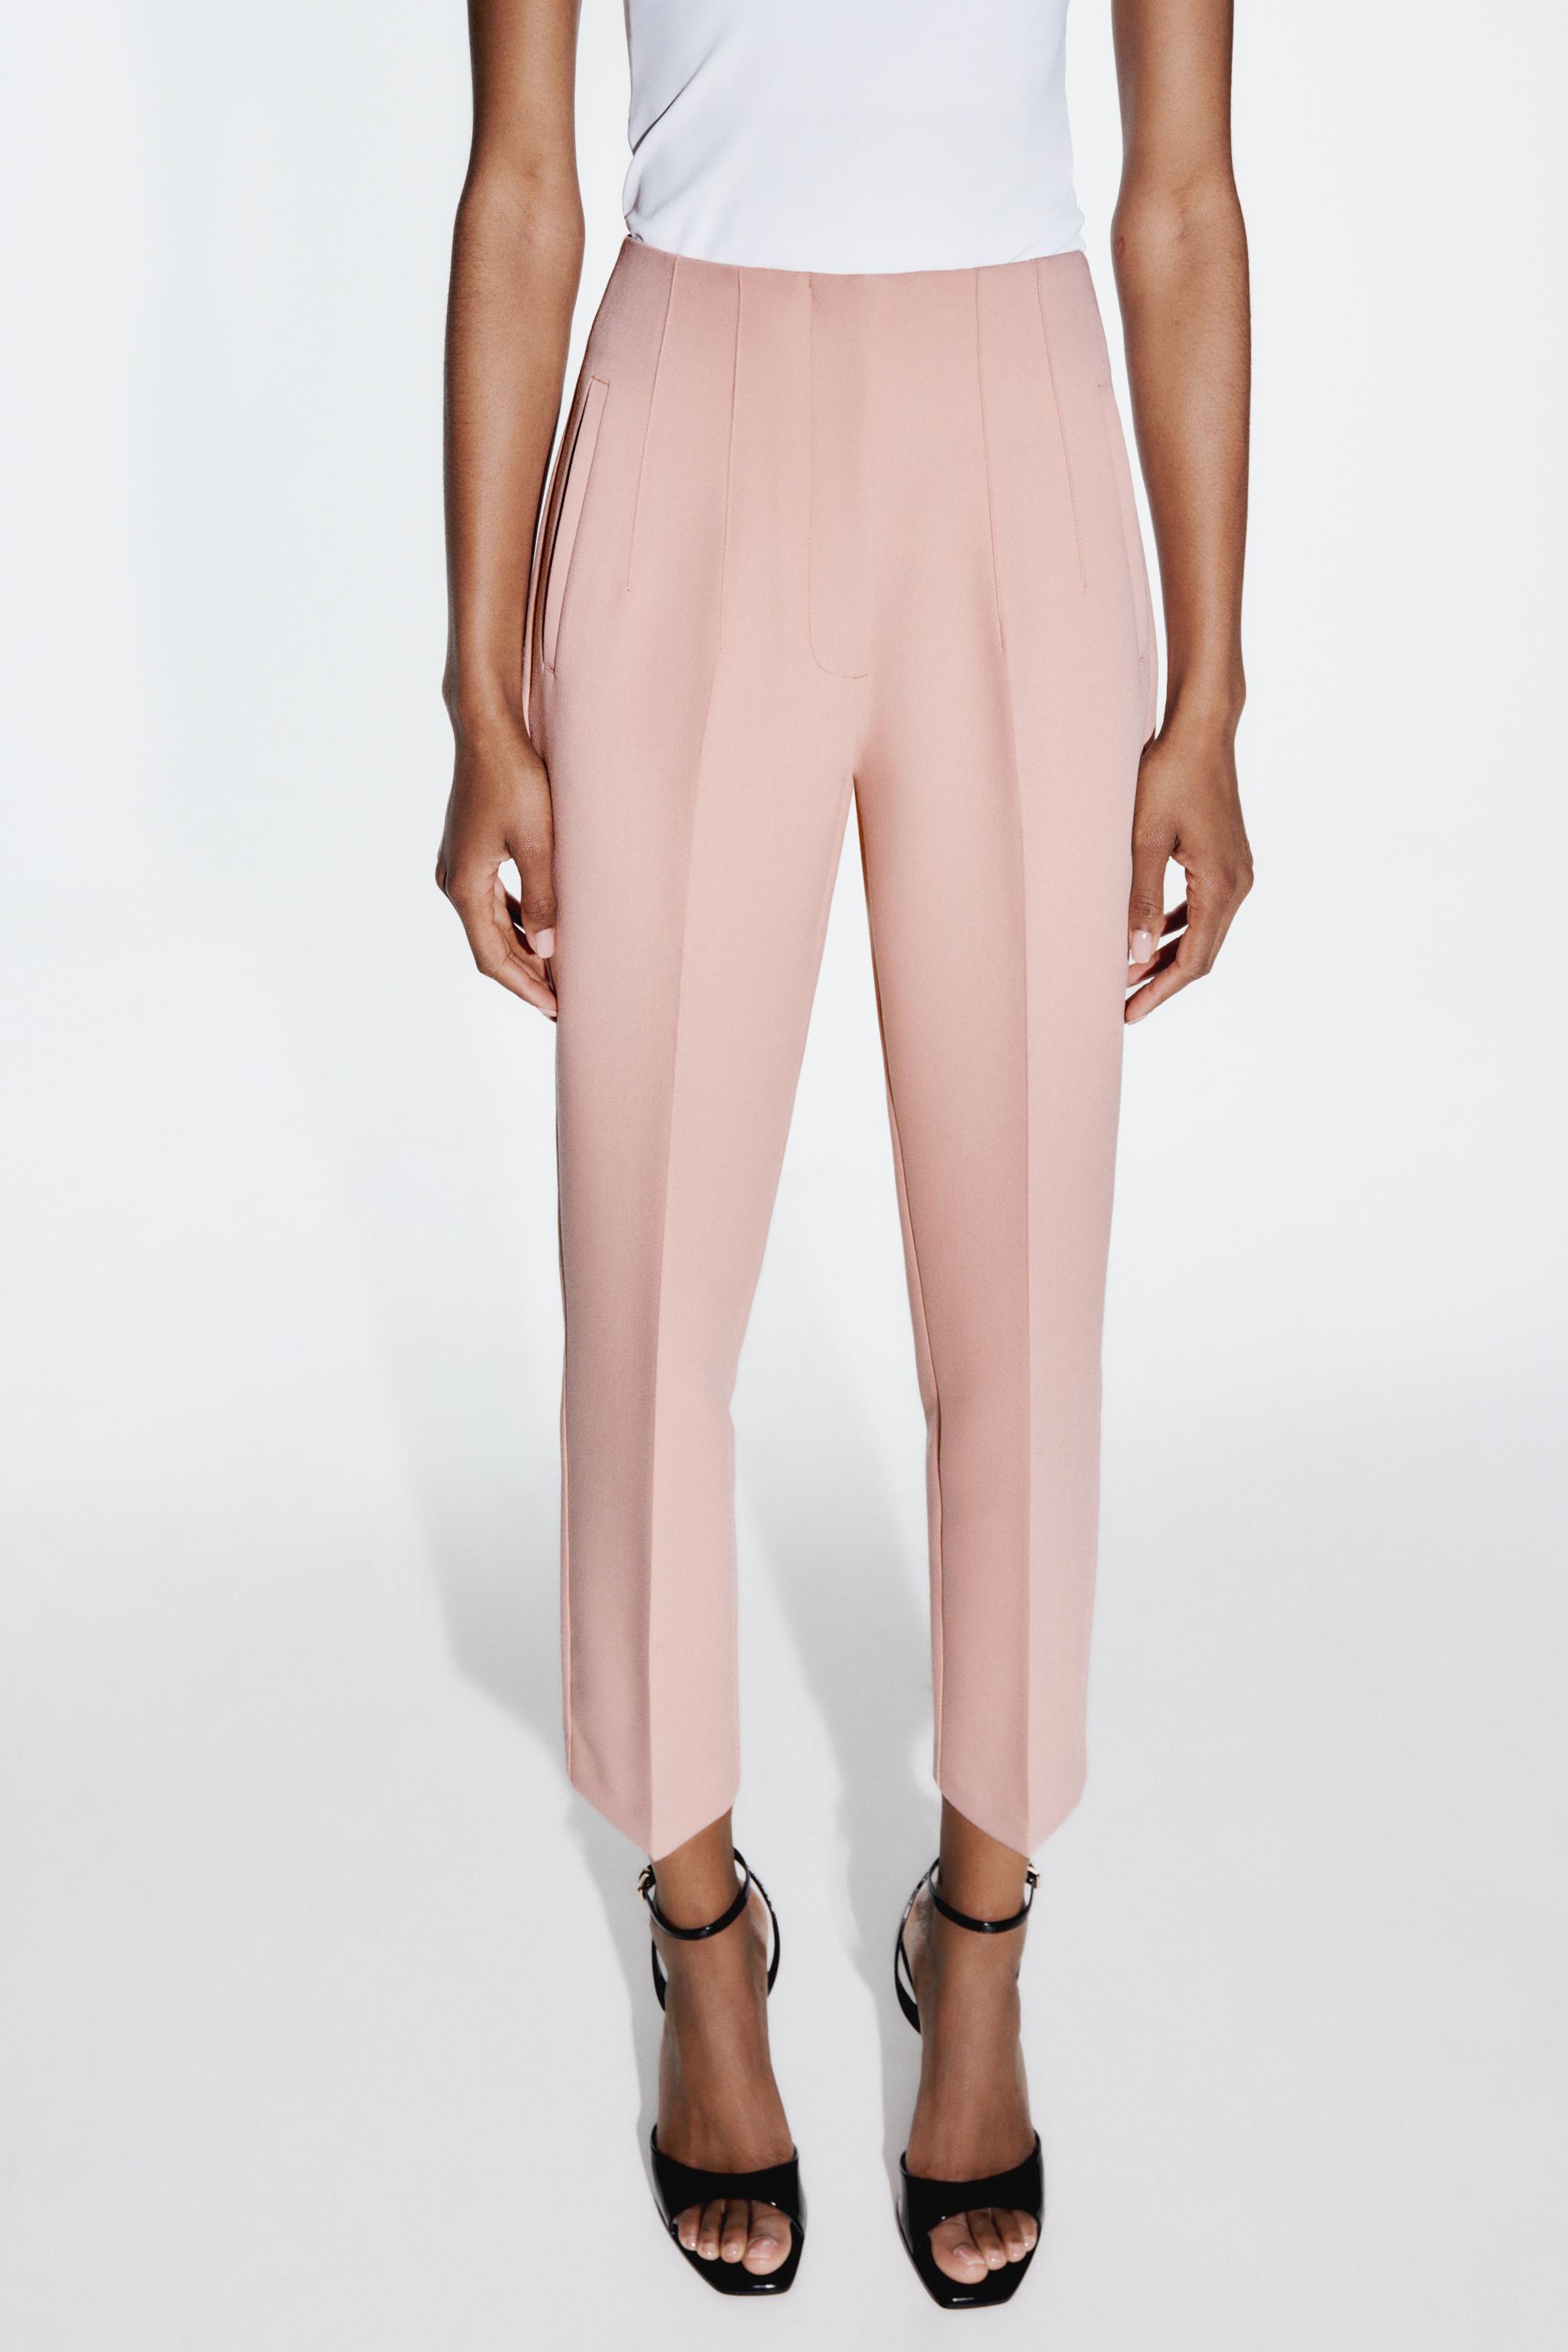 Women's Cheap Pink Trousers, Pale & Hot Pink